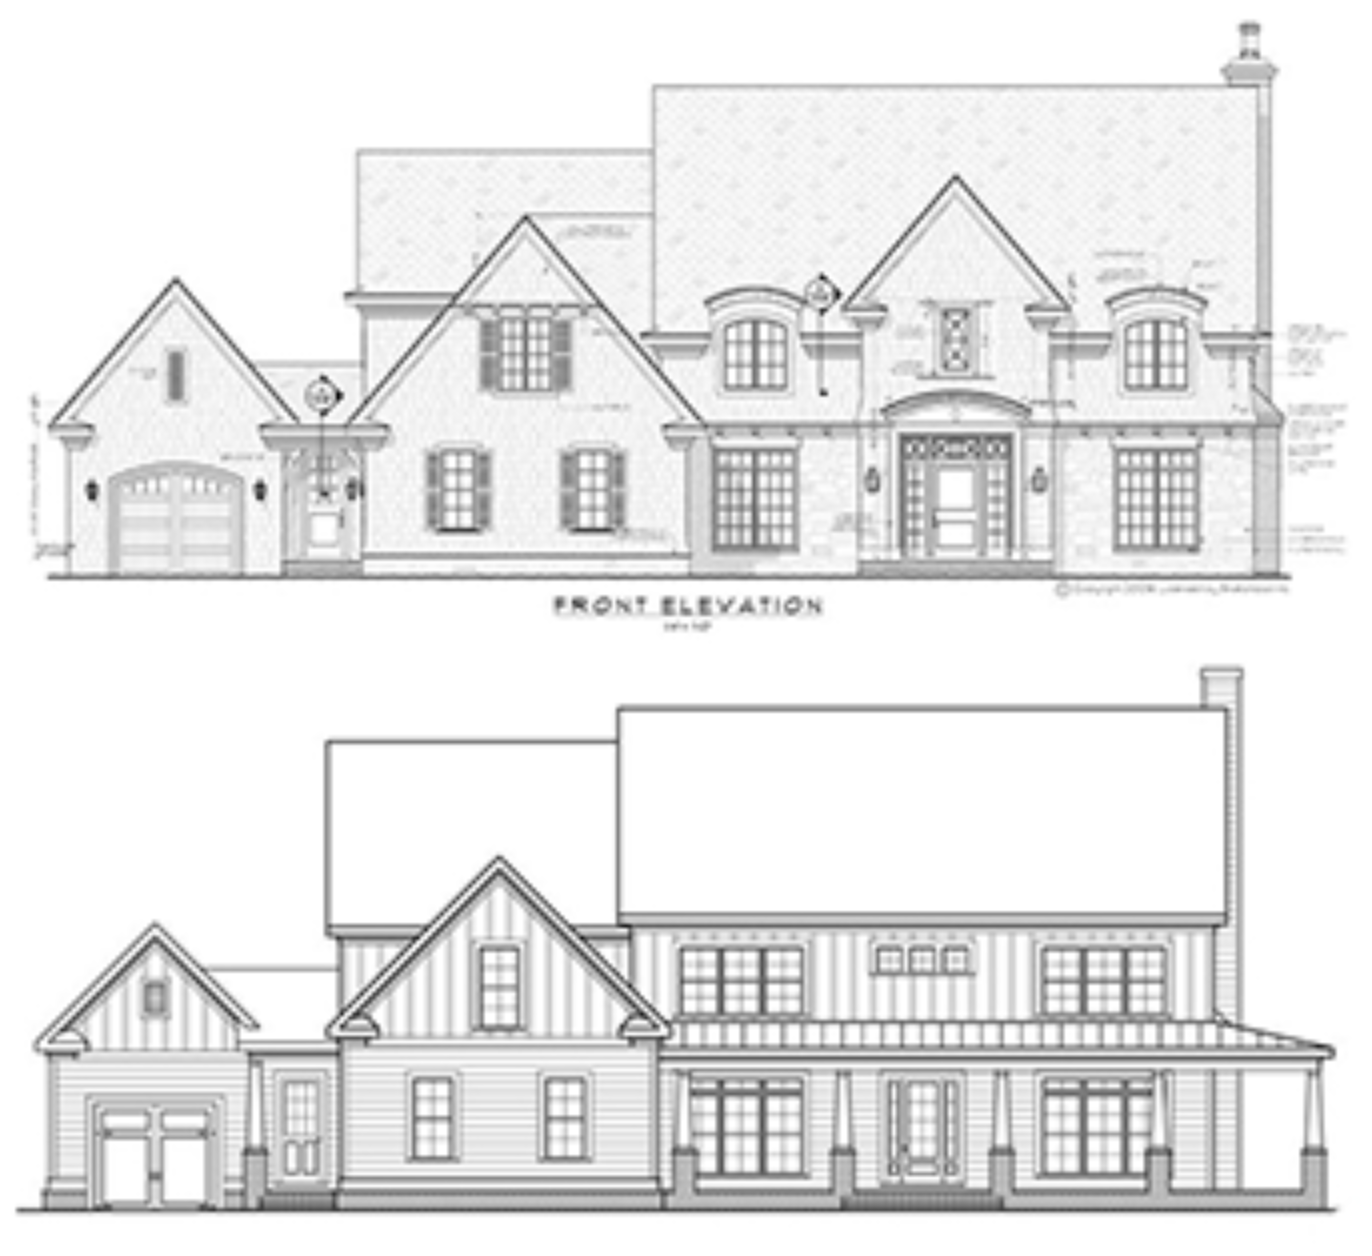 Illustrations of exterior house plans showing the front and back of a home.